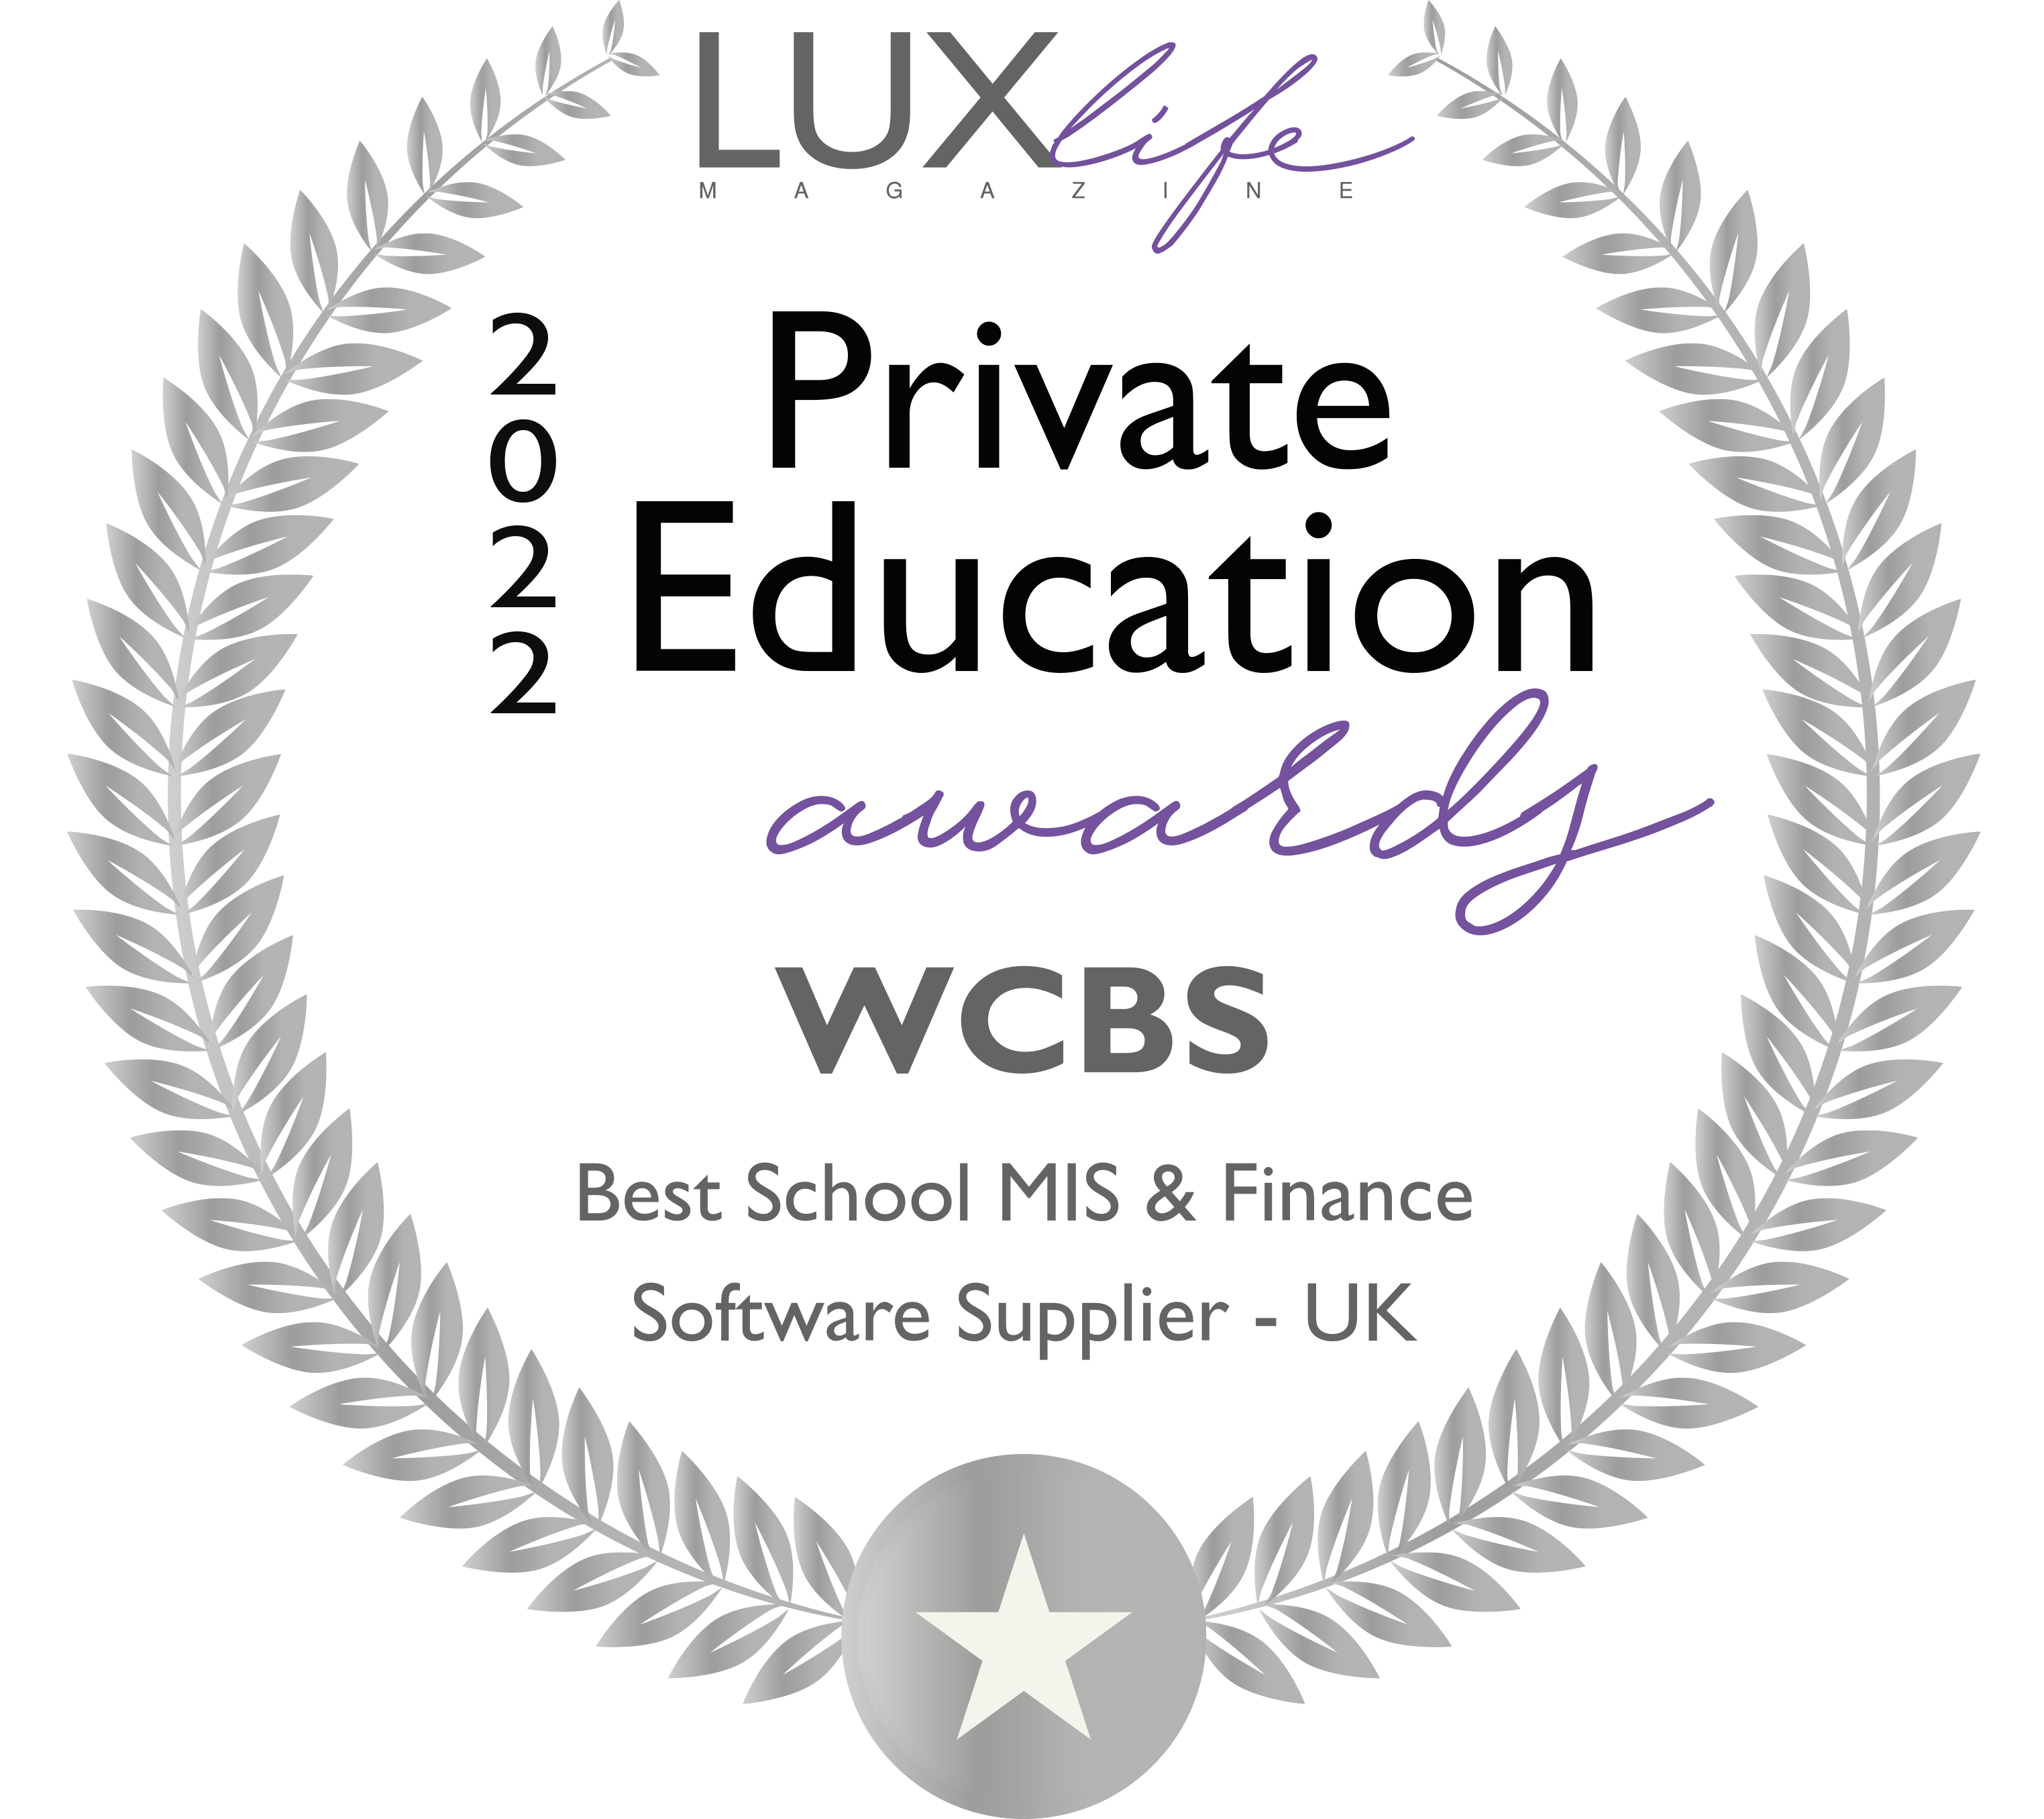 Lux life private education awards